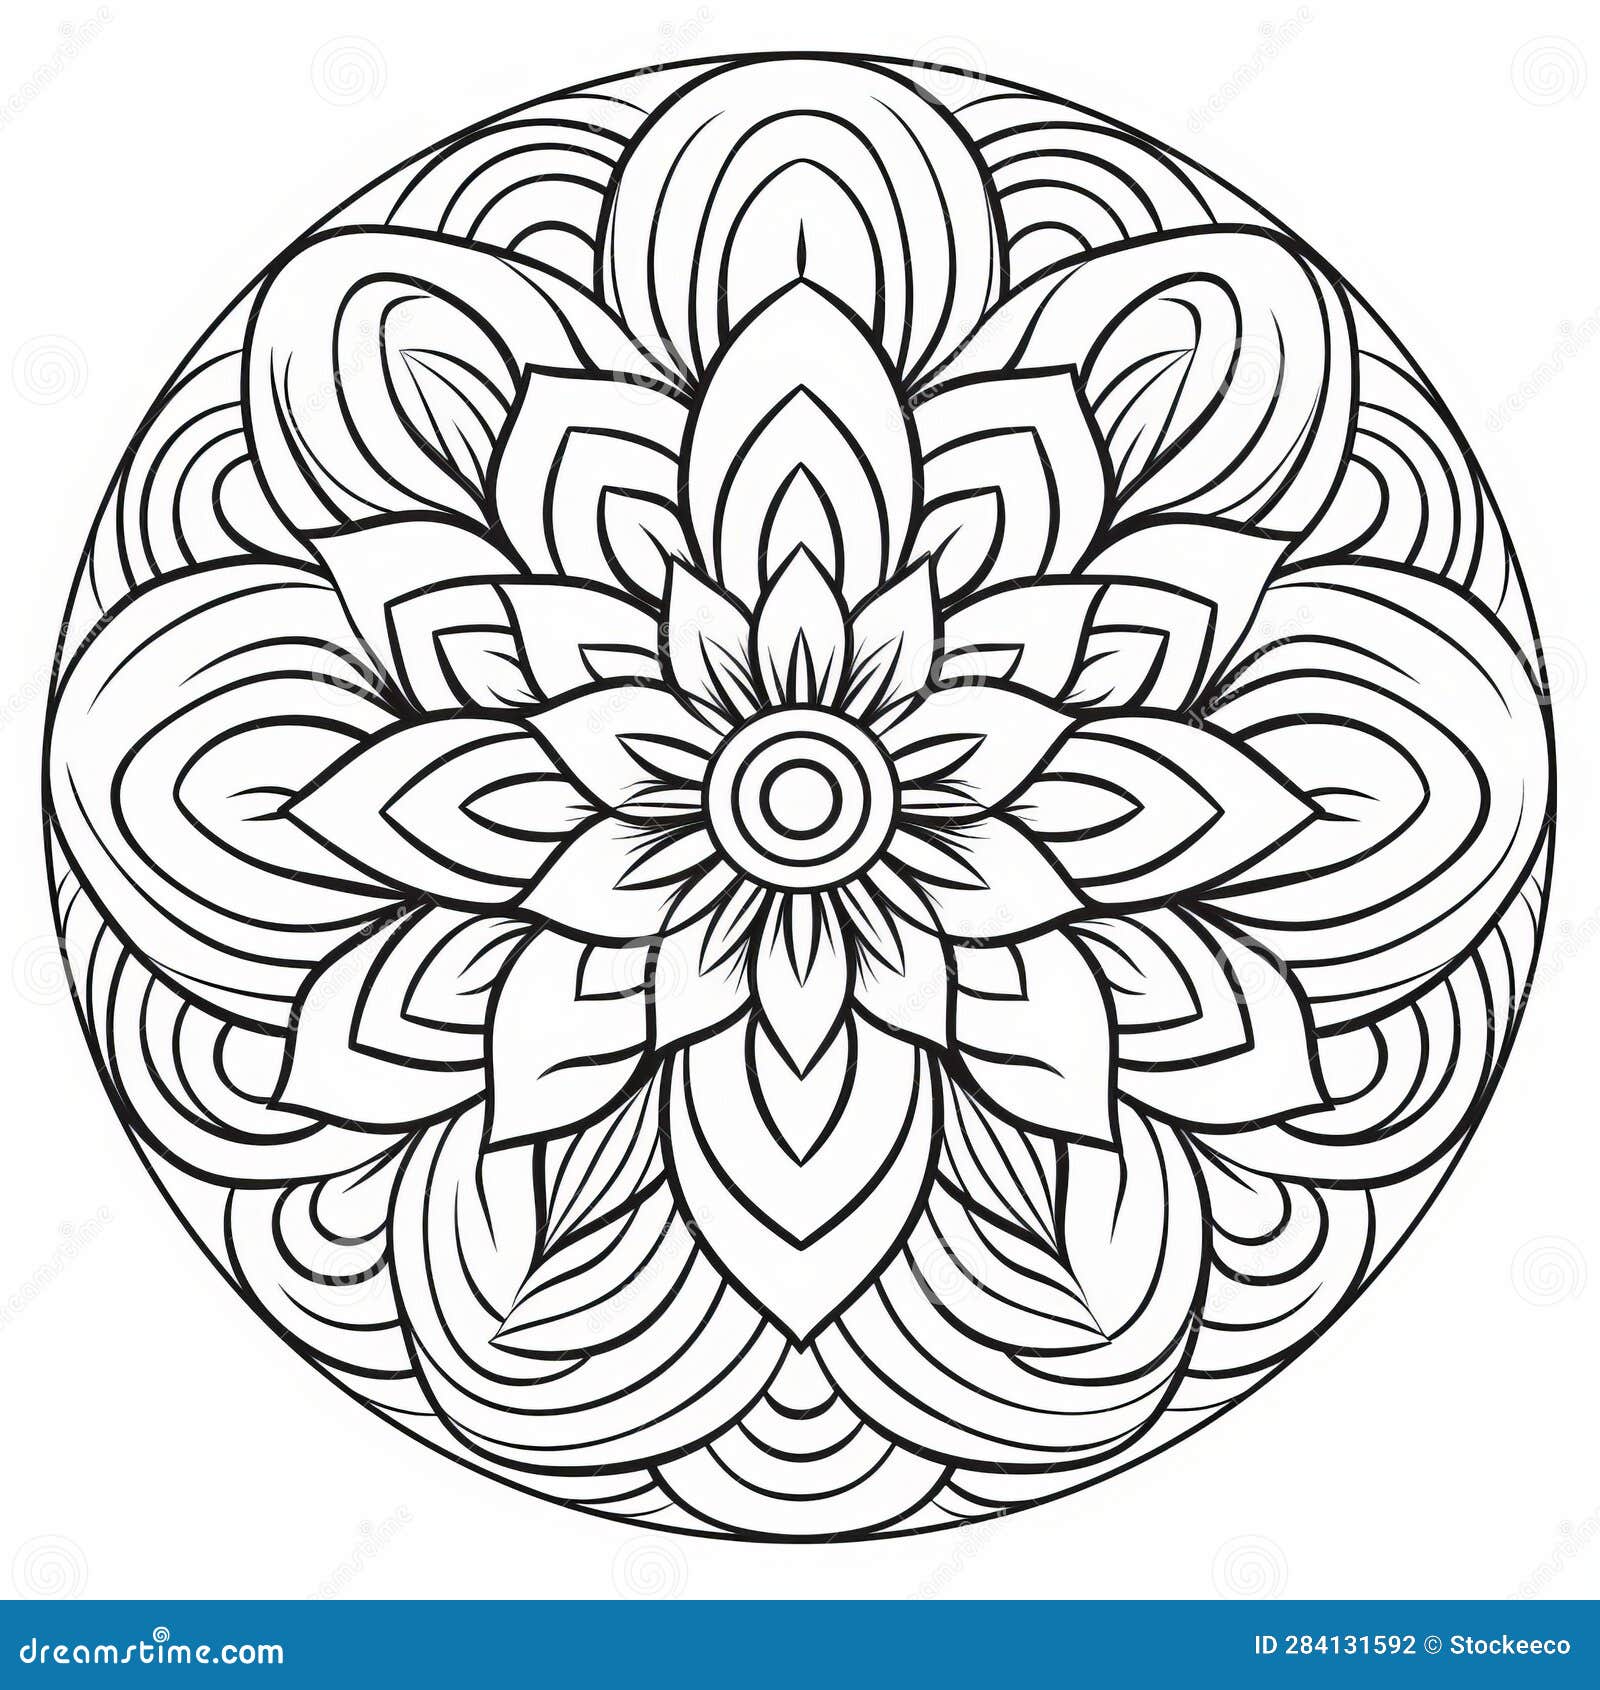 Flower mandala pattern for kids coloring pages Vector Image